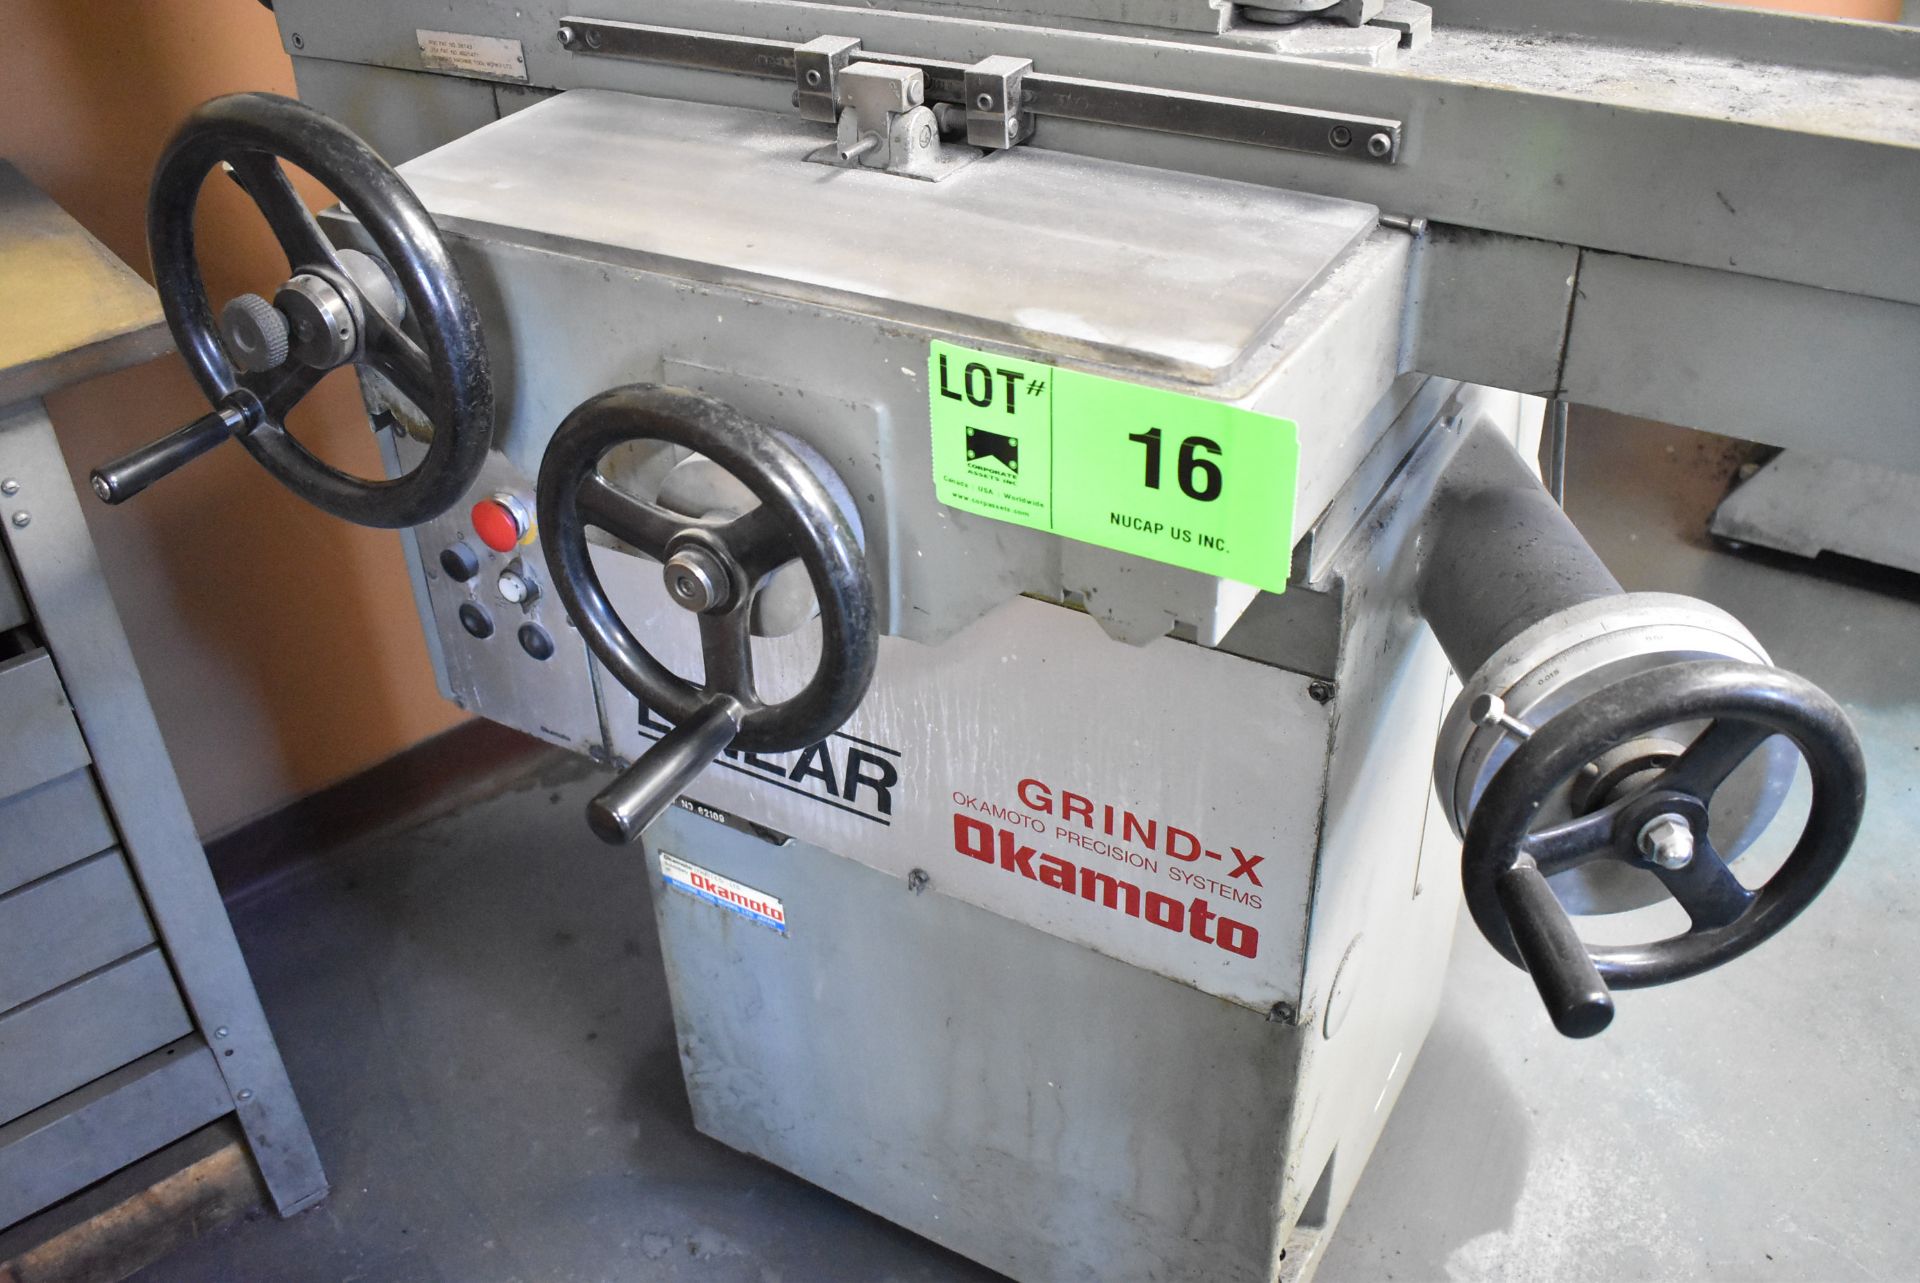 OKAMOTO L6-12B CONVENTIONAL SURFACE GRINDER WITH 6"X12" ELECTROMAGNETIC CHUCK, SPEEDS TO 3450 RPM, - Image 4 of 7